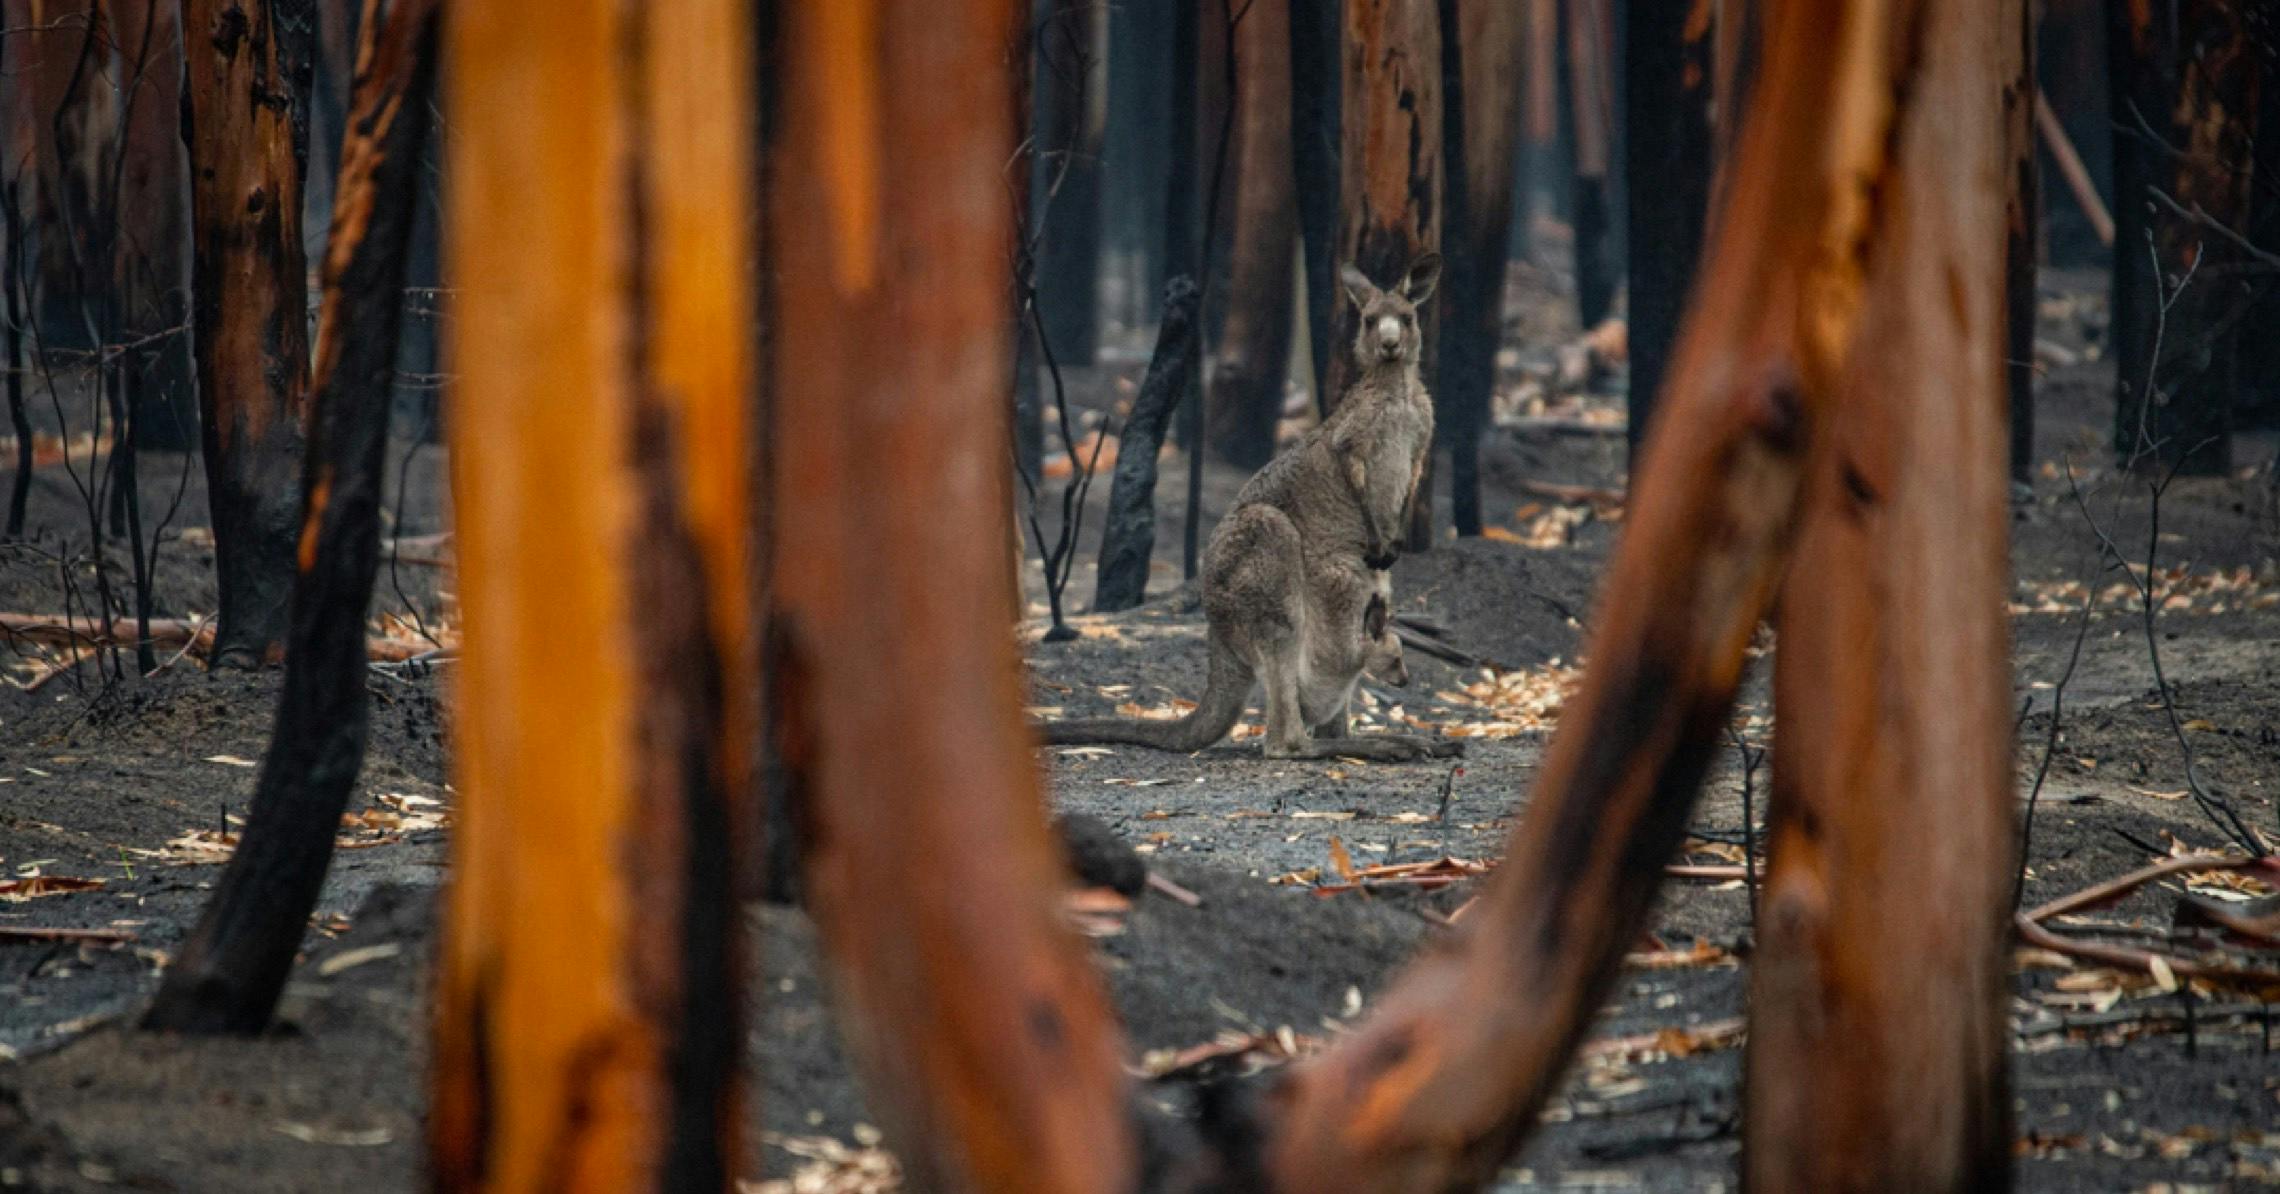 Photograph of a mother kangaroo carrying her baby through a burned forest.